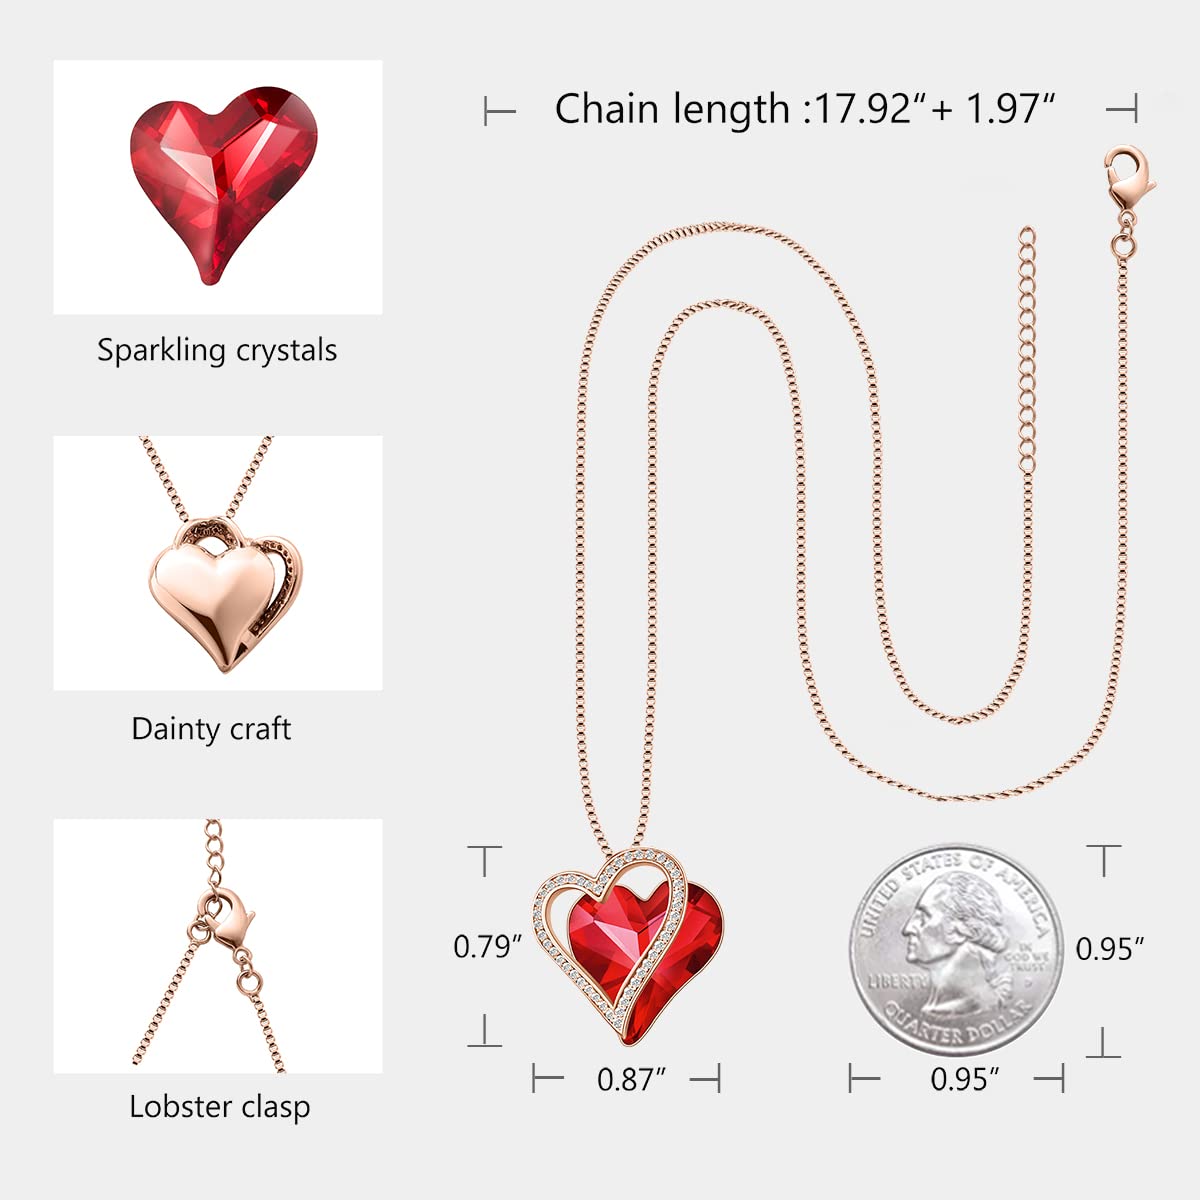 Sumonyo Love Heart Pendant Necklaces for Women Crystals Jewelry Gifts for Women Her Girlfriend Mother's Wife Christmas Birthday Anniversary Valentines Day